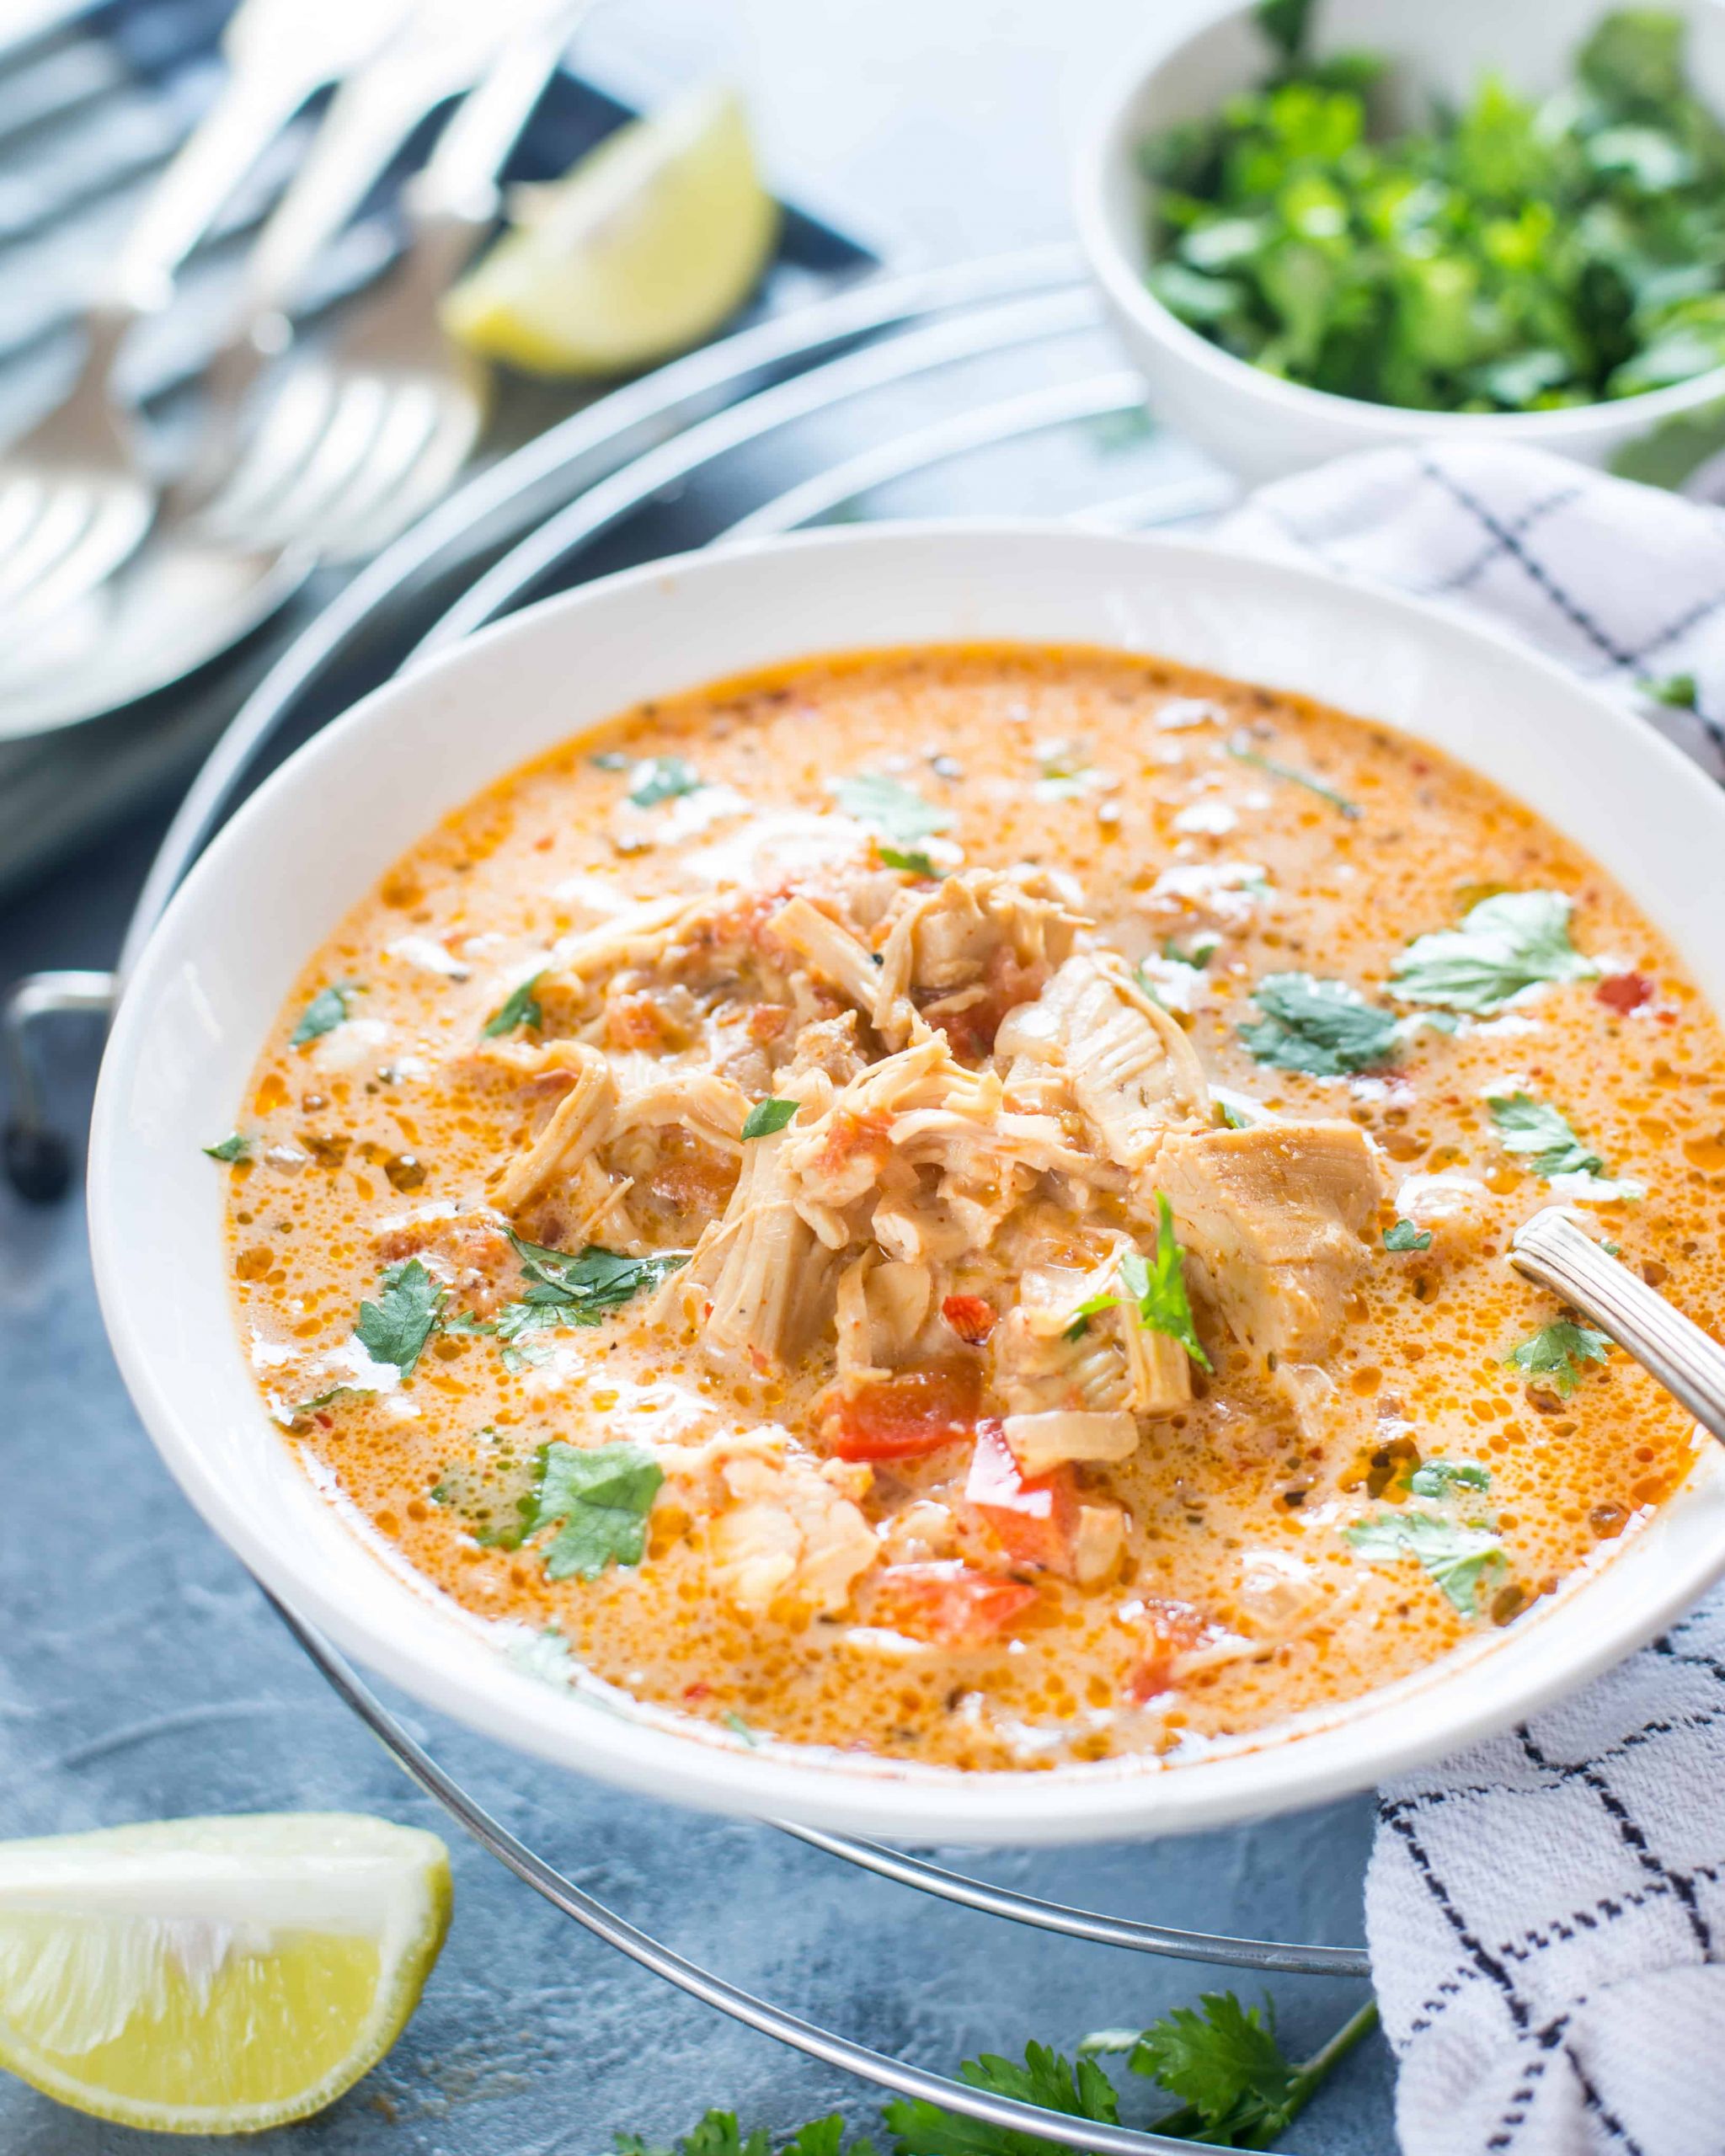 Slow Cooker Keto Soup
 SLOW COOKER MEXICAN CHICKEN SOUP The flavours of kitchen